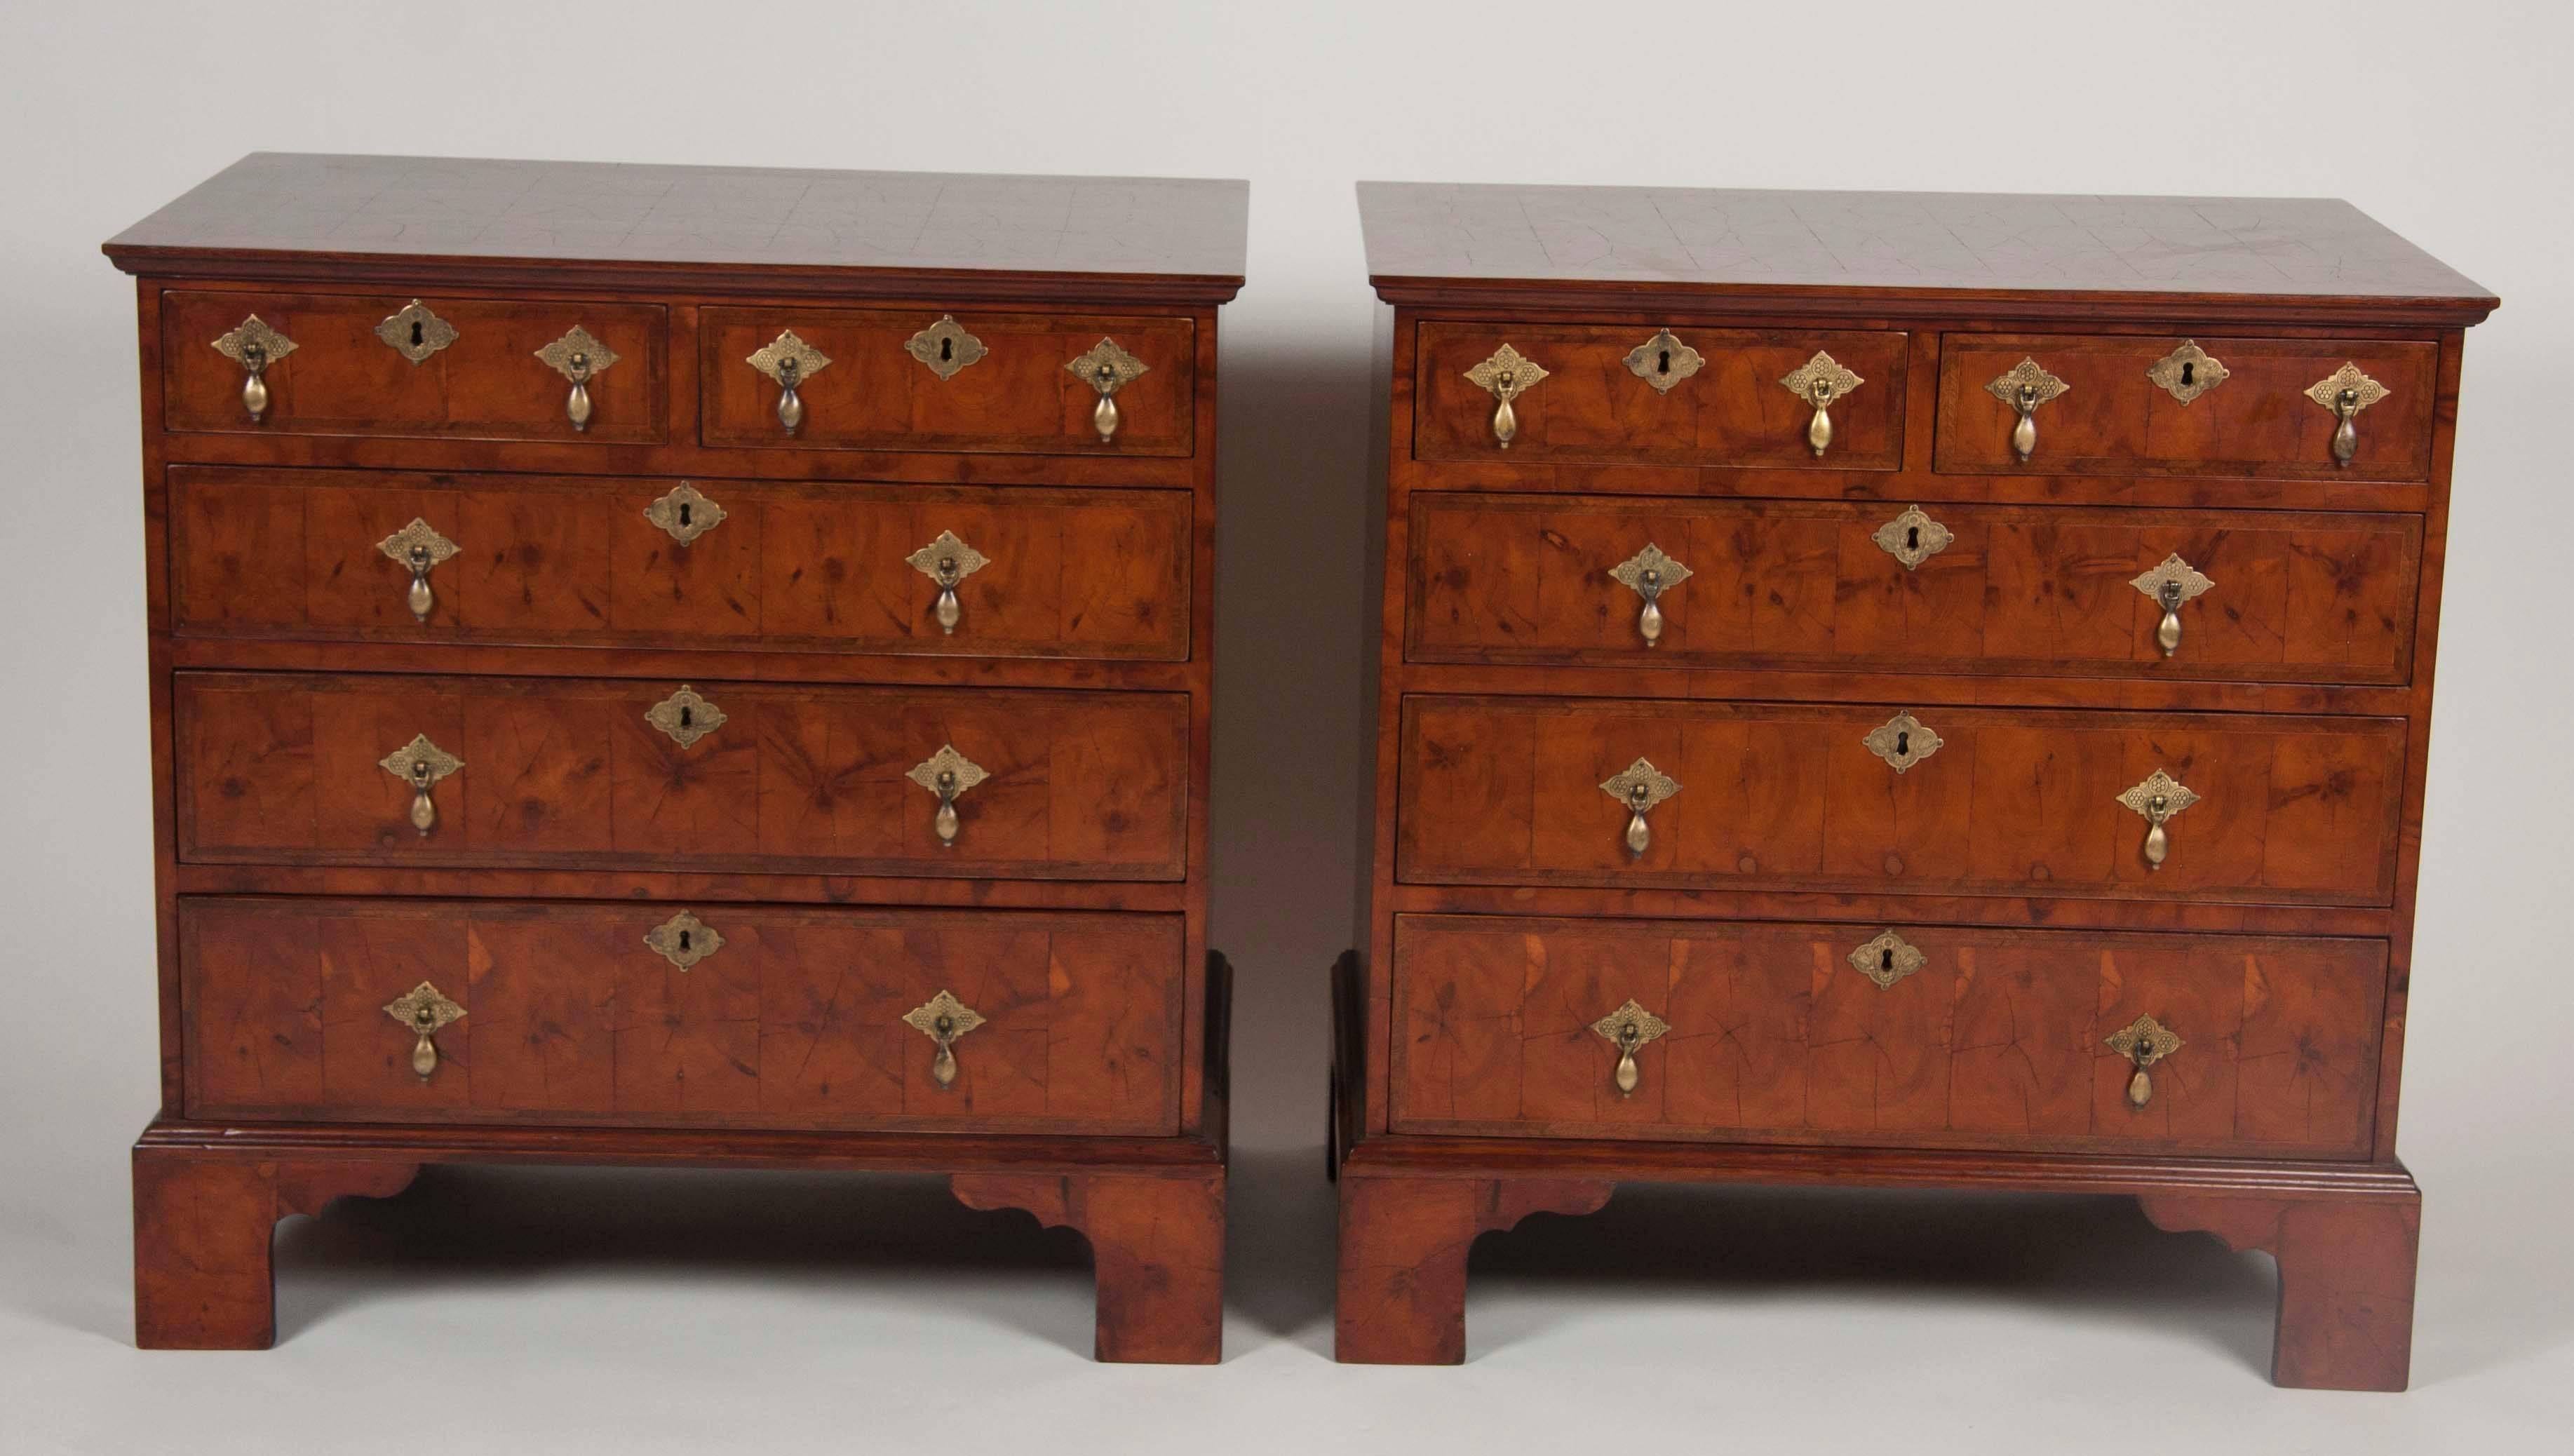 A pair of English oyster shell veneer chests of drawers. Fruitwood, feather band inlay on top and drawer fronts. The top is crossbanded. Bracket feet. May be sold separately.